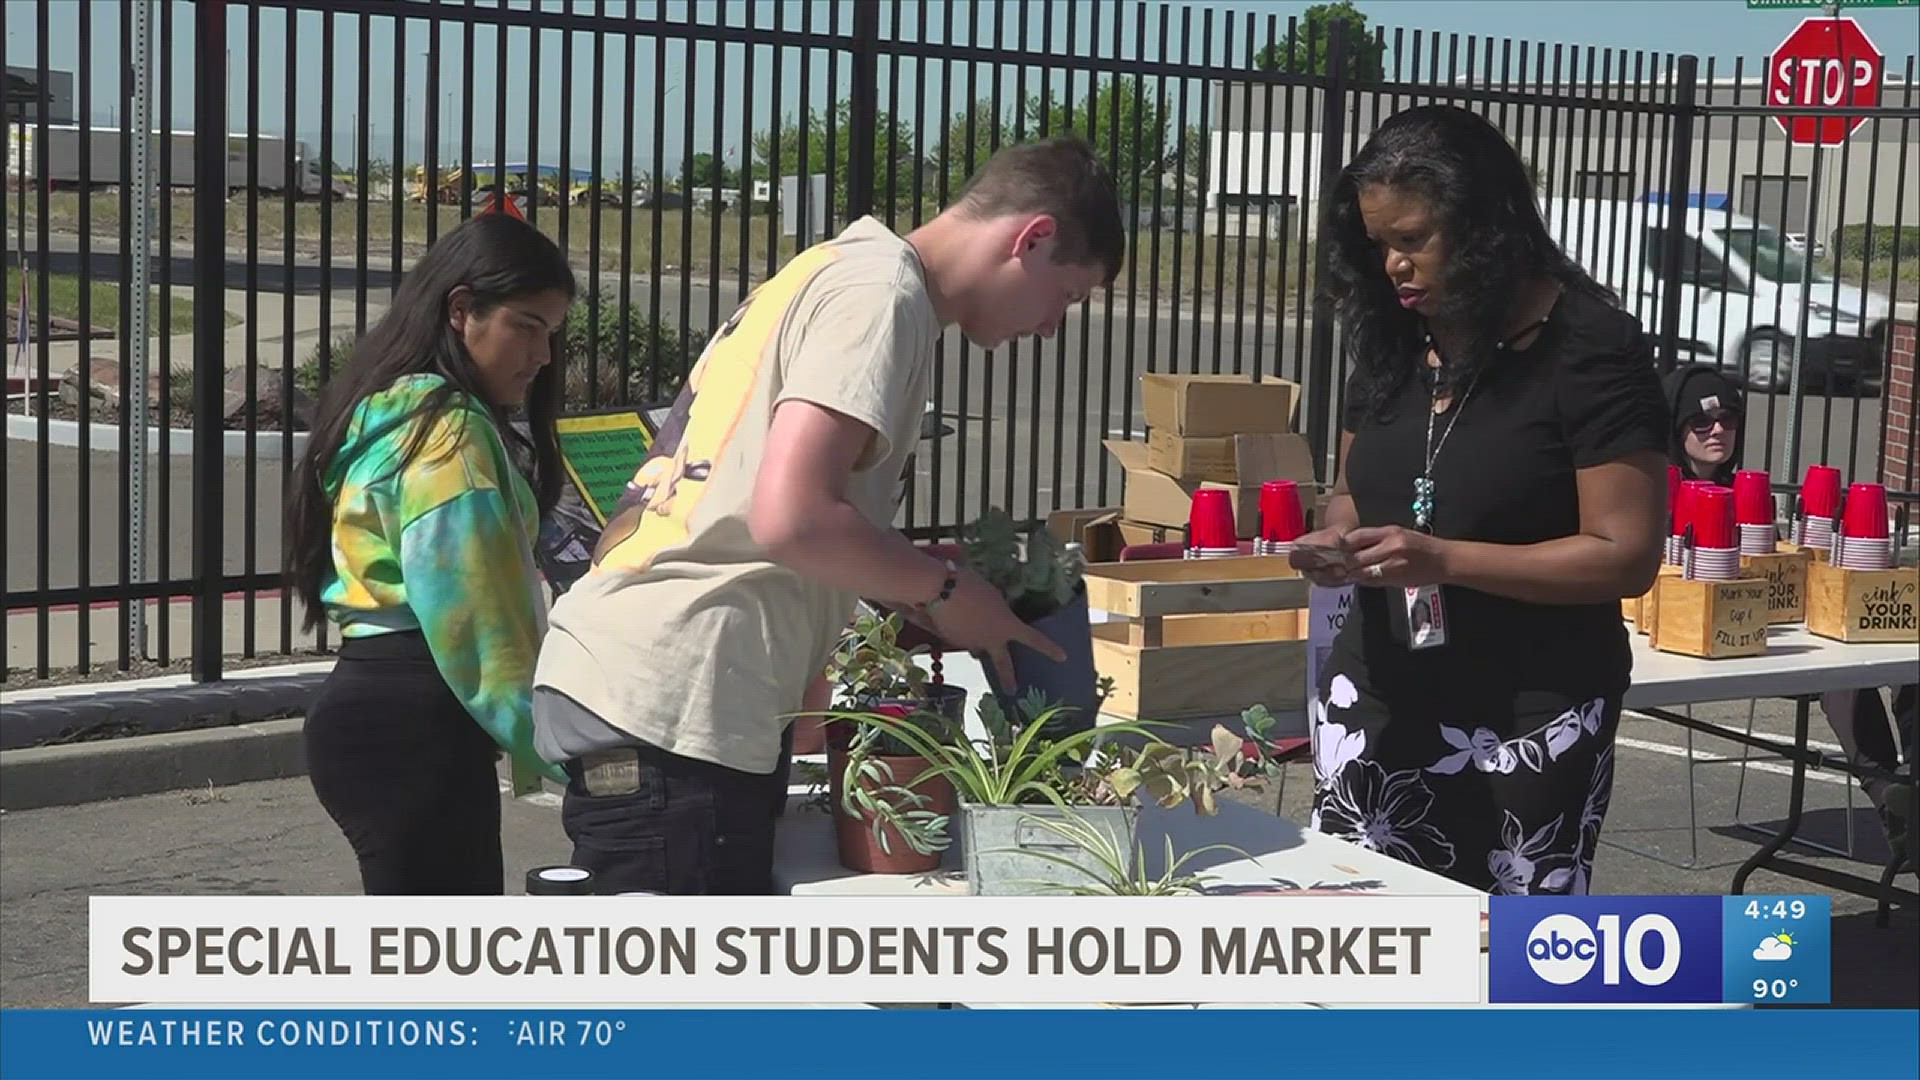 Students enrolled in special education programs across the county gathered at the South Stockton facility to host a farmers market featuring handmade items.